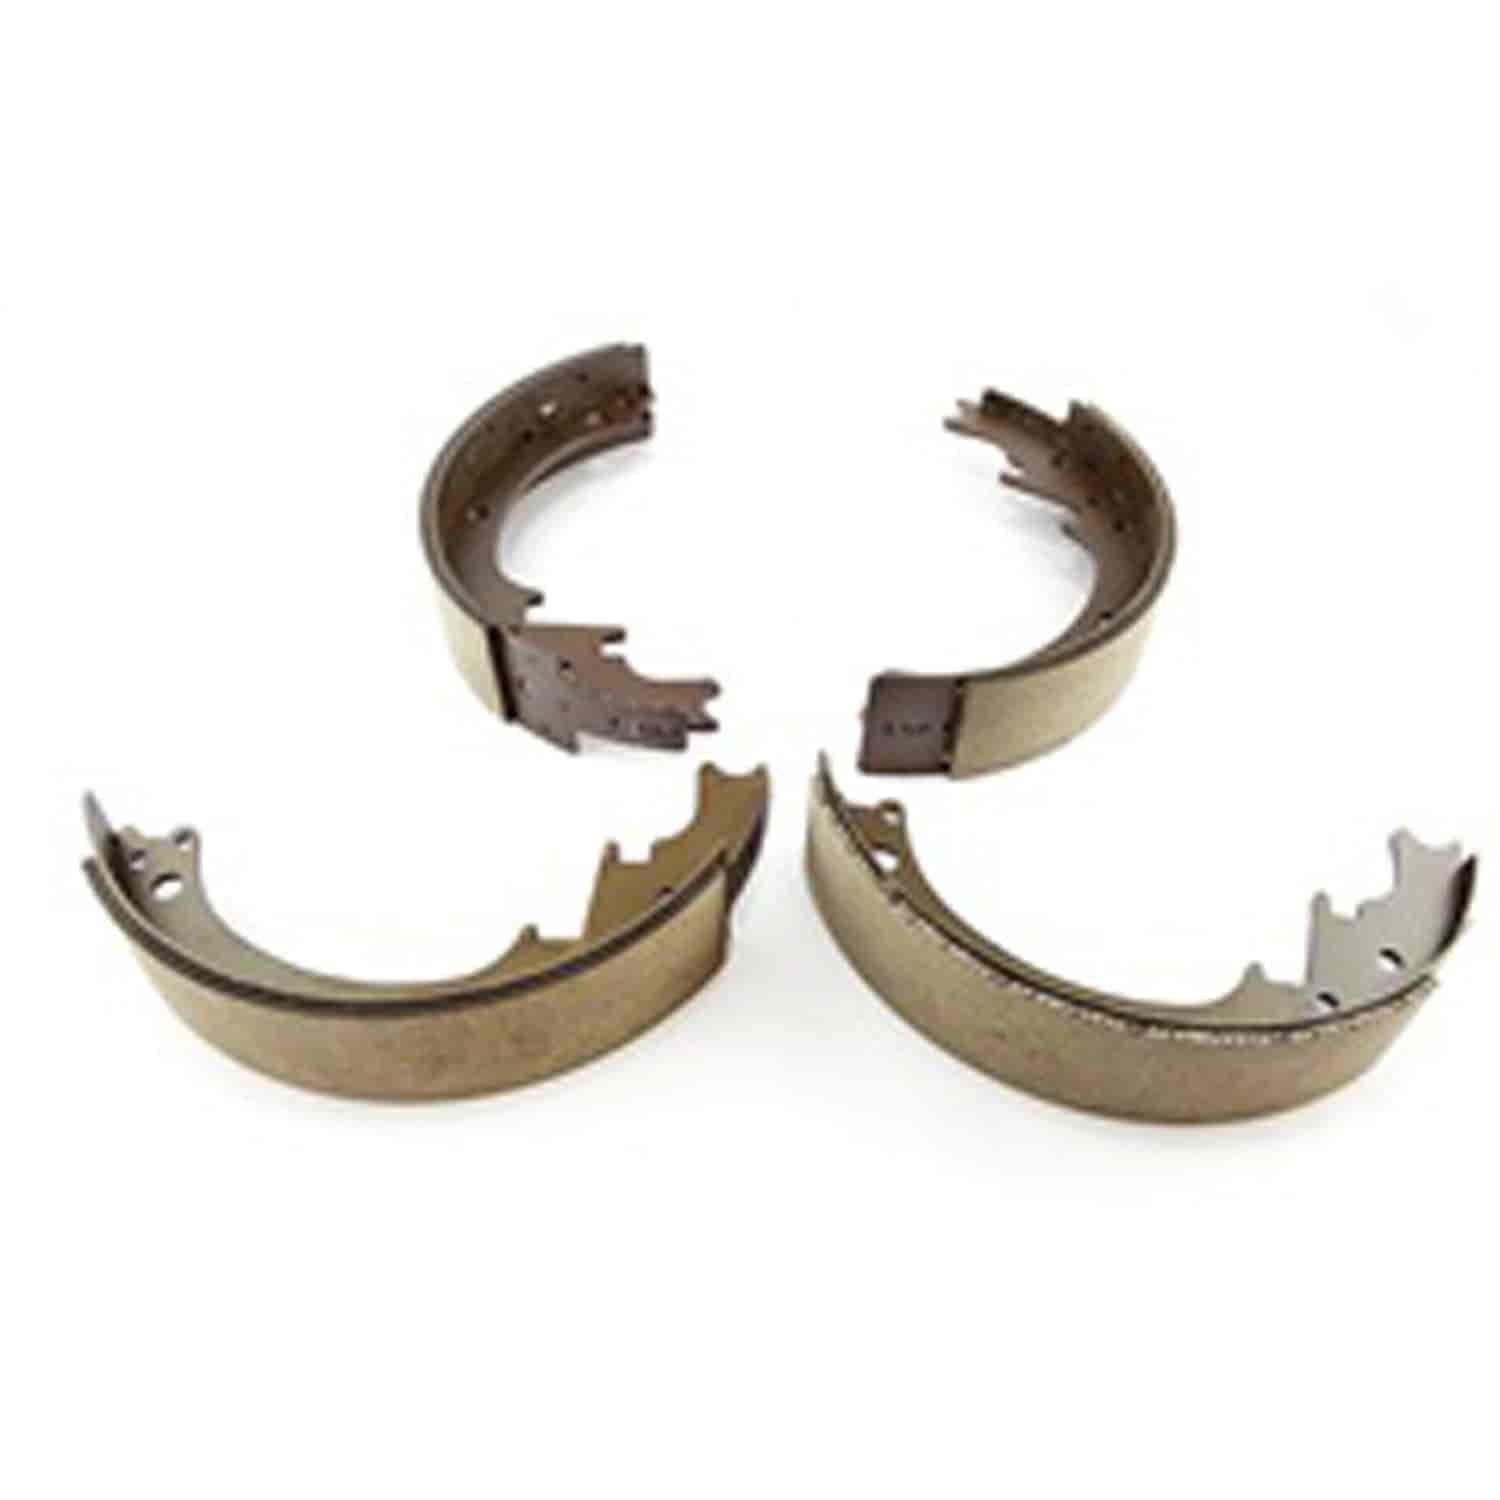 This set of brake shoes from Omix-ADA fits 12 x 2-1/2 unfinned drums on the front or rear axle. Fits